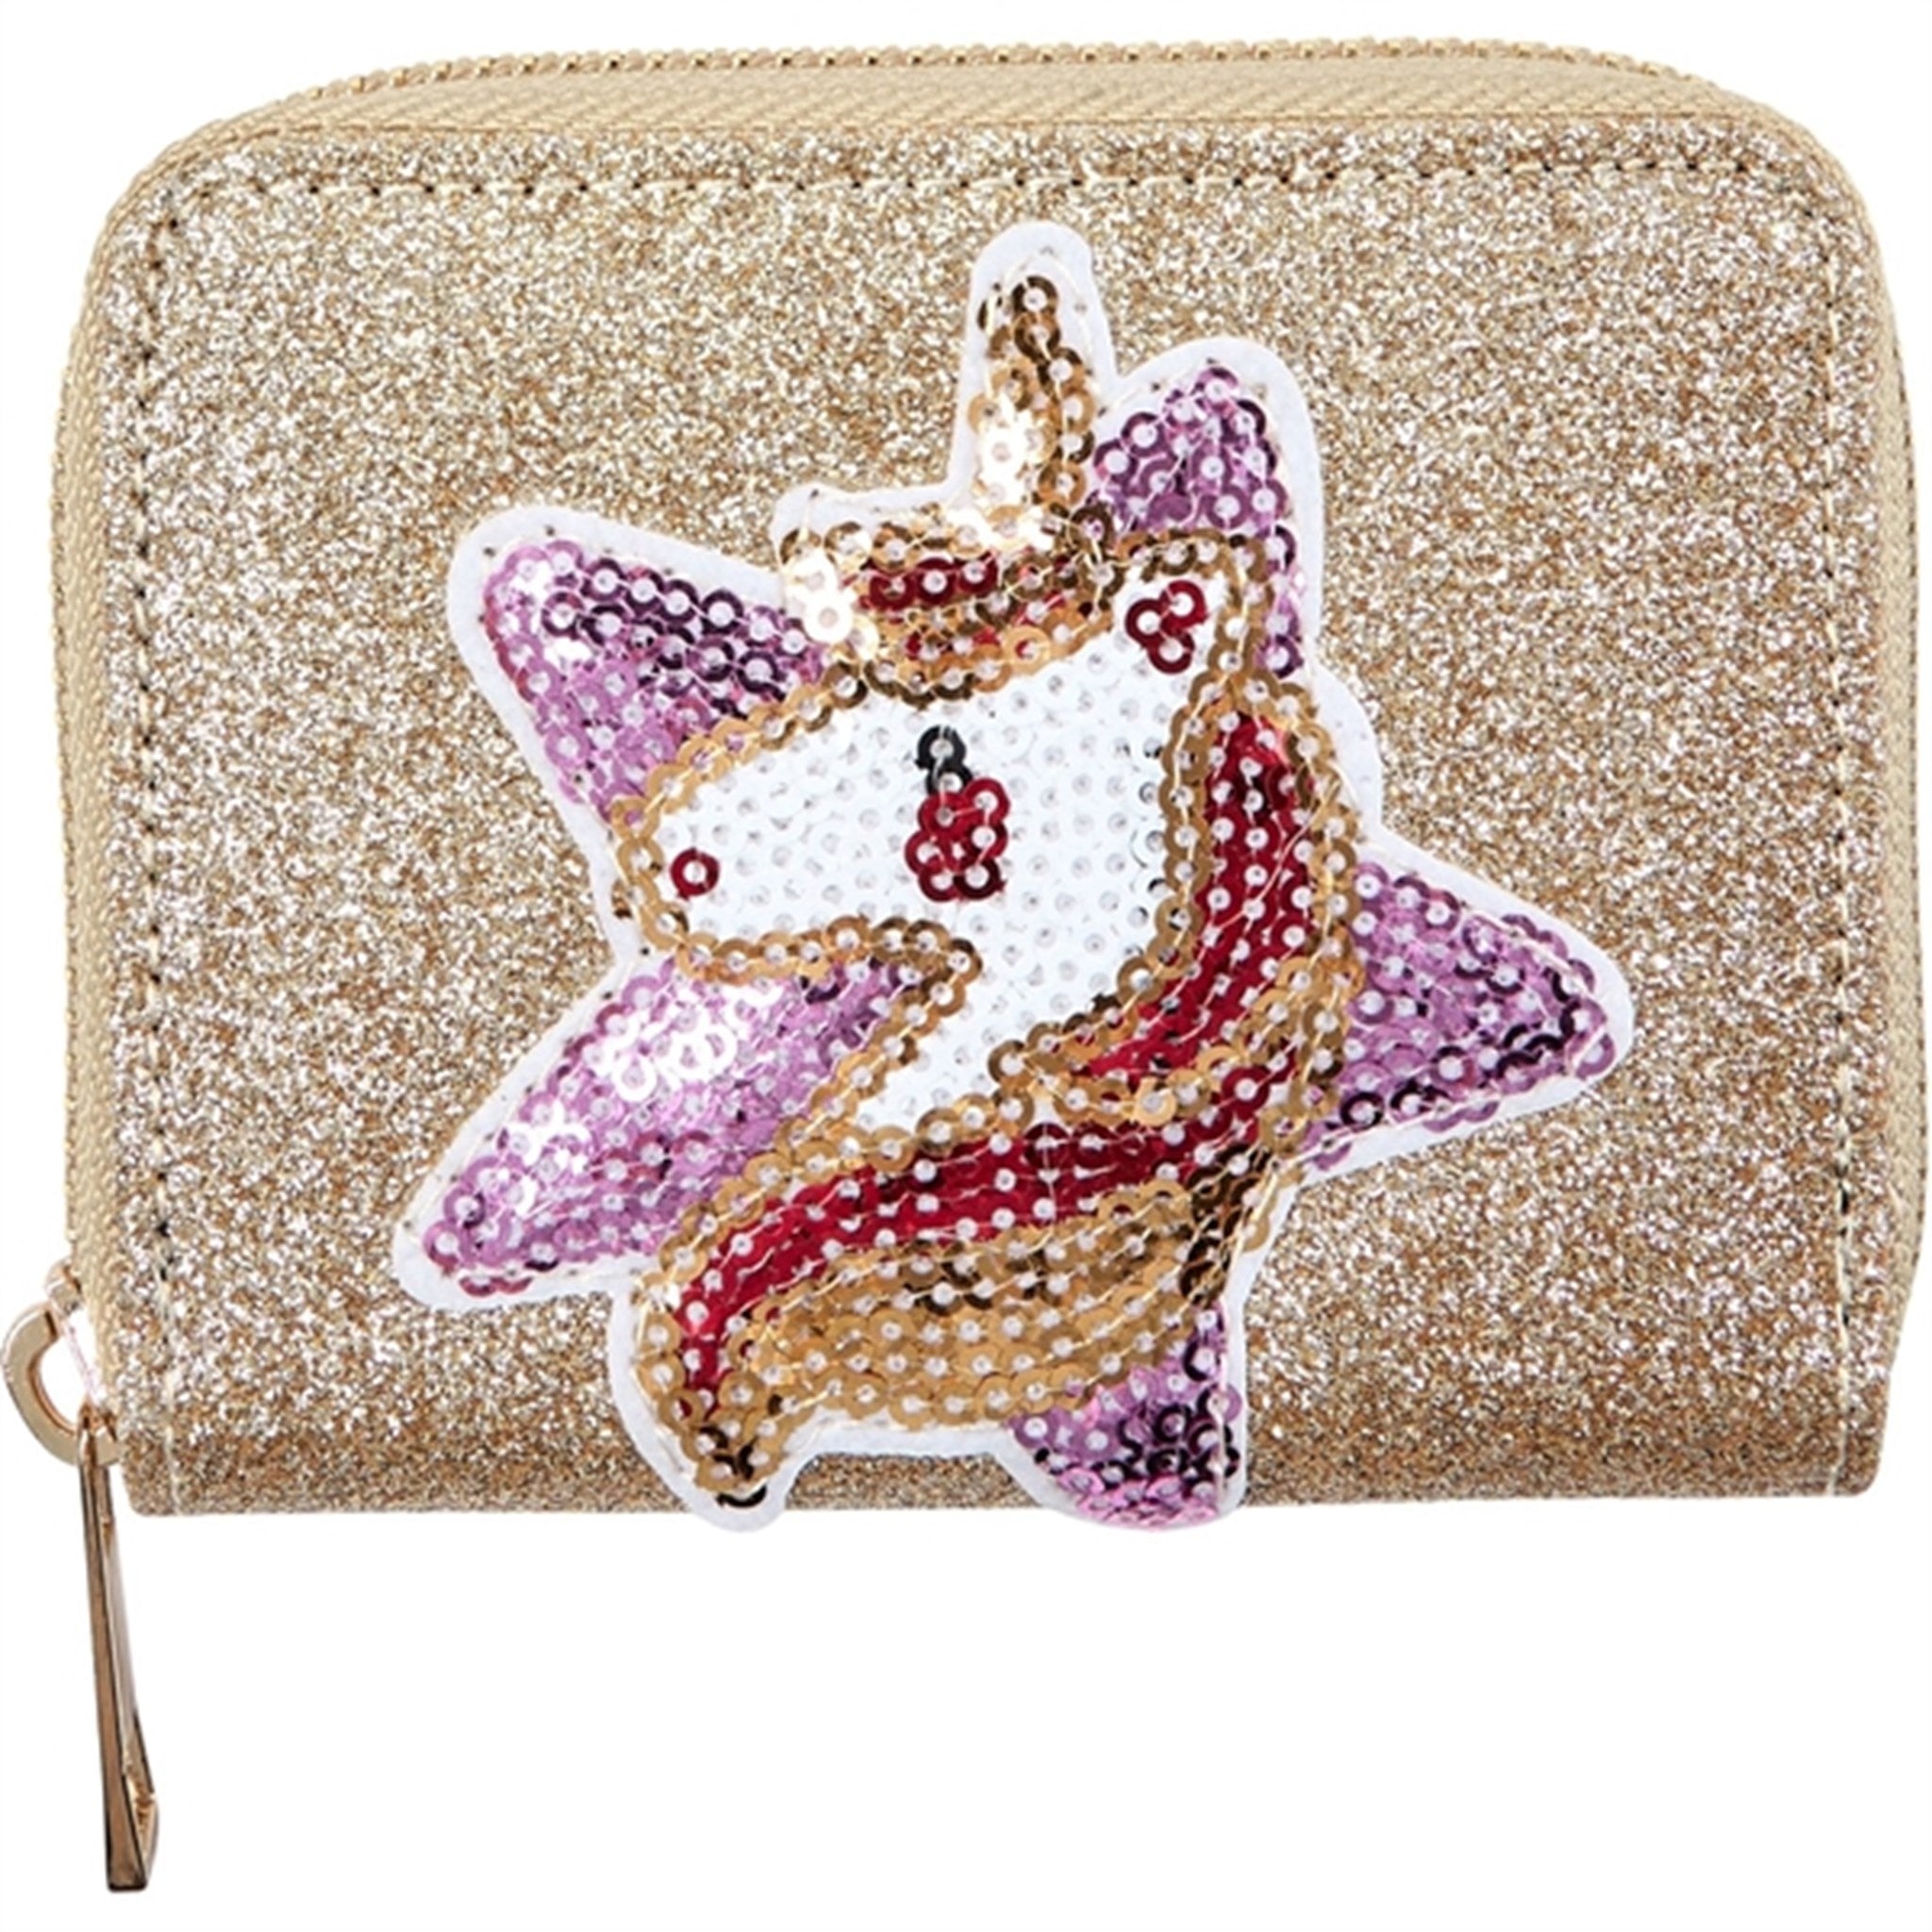 Petit By Sofie Schnoor Champagne Wallet